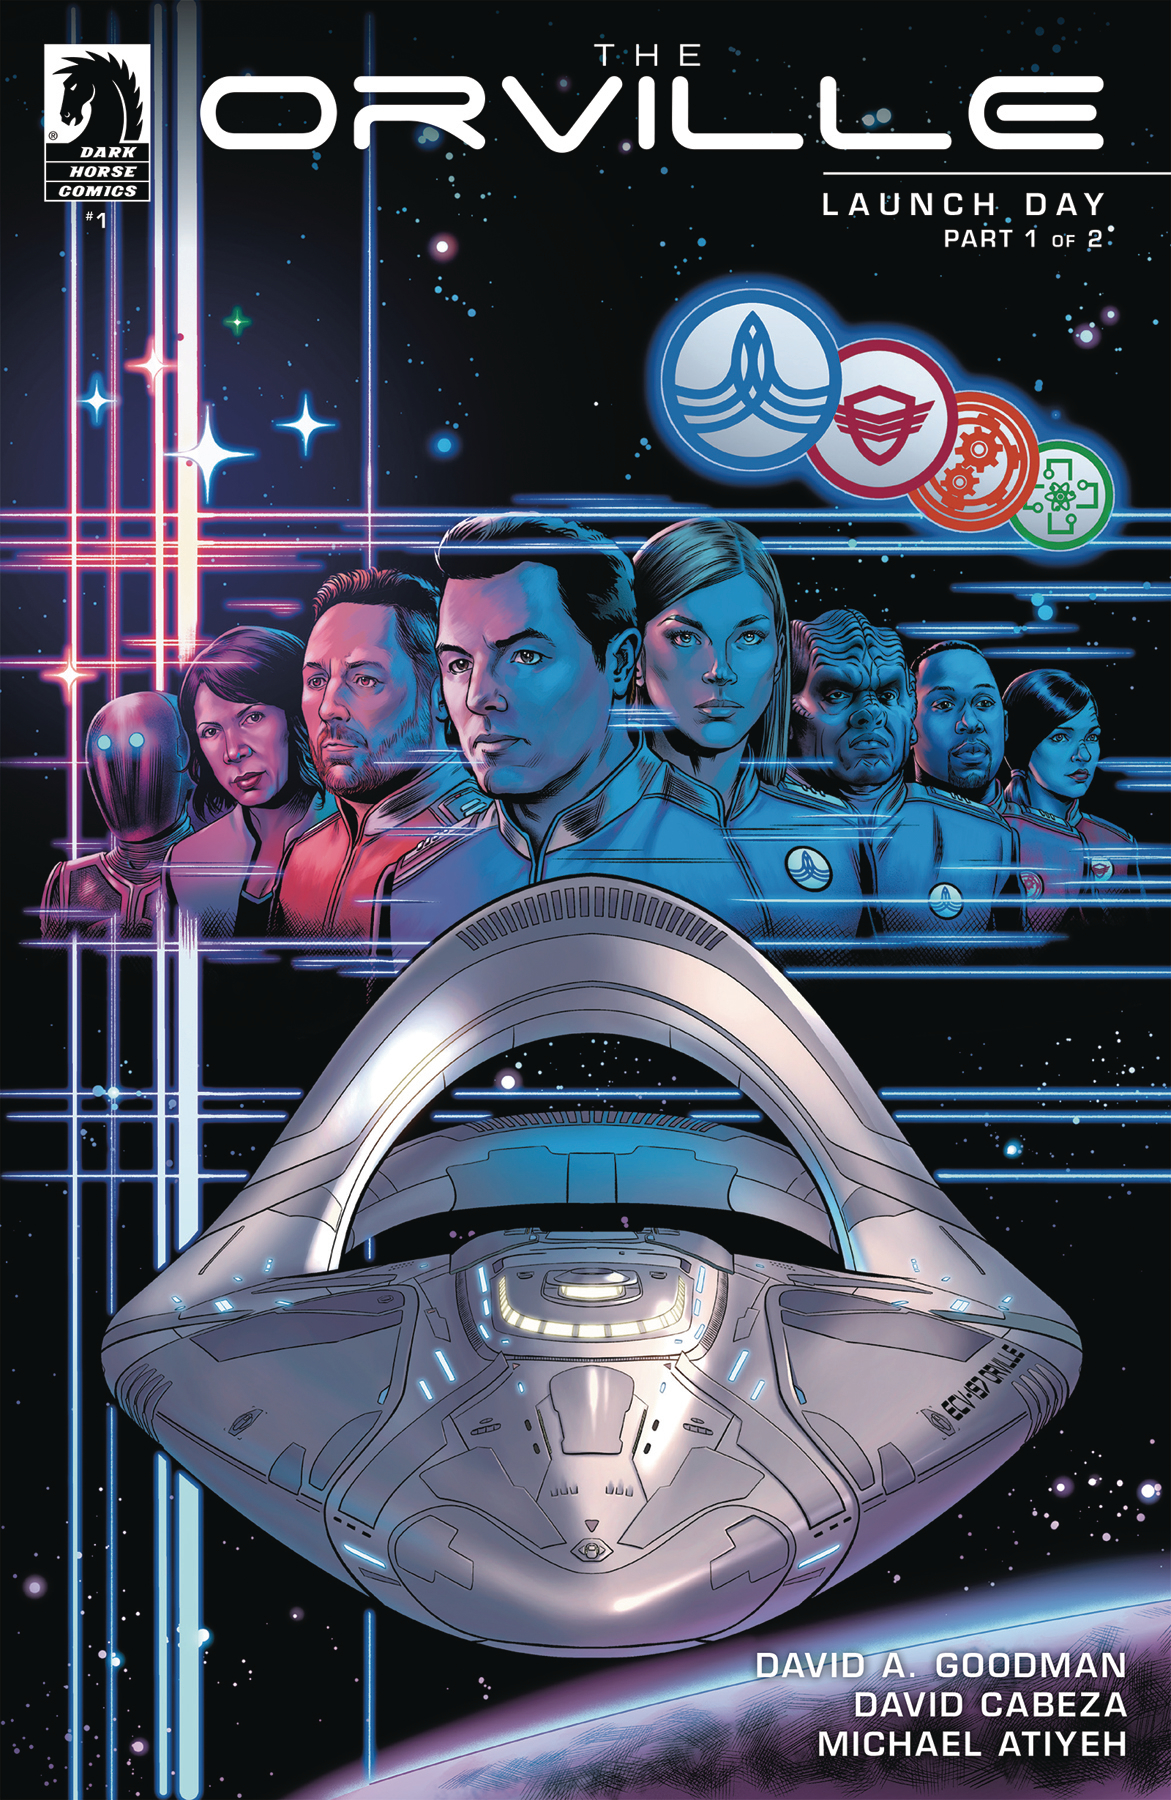 The Orville Launch day part 2 cover